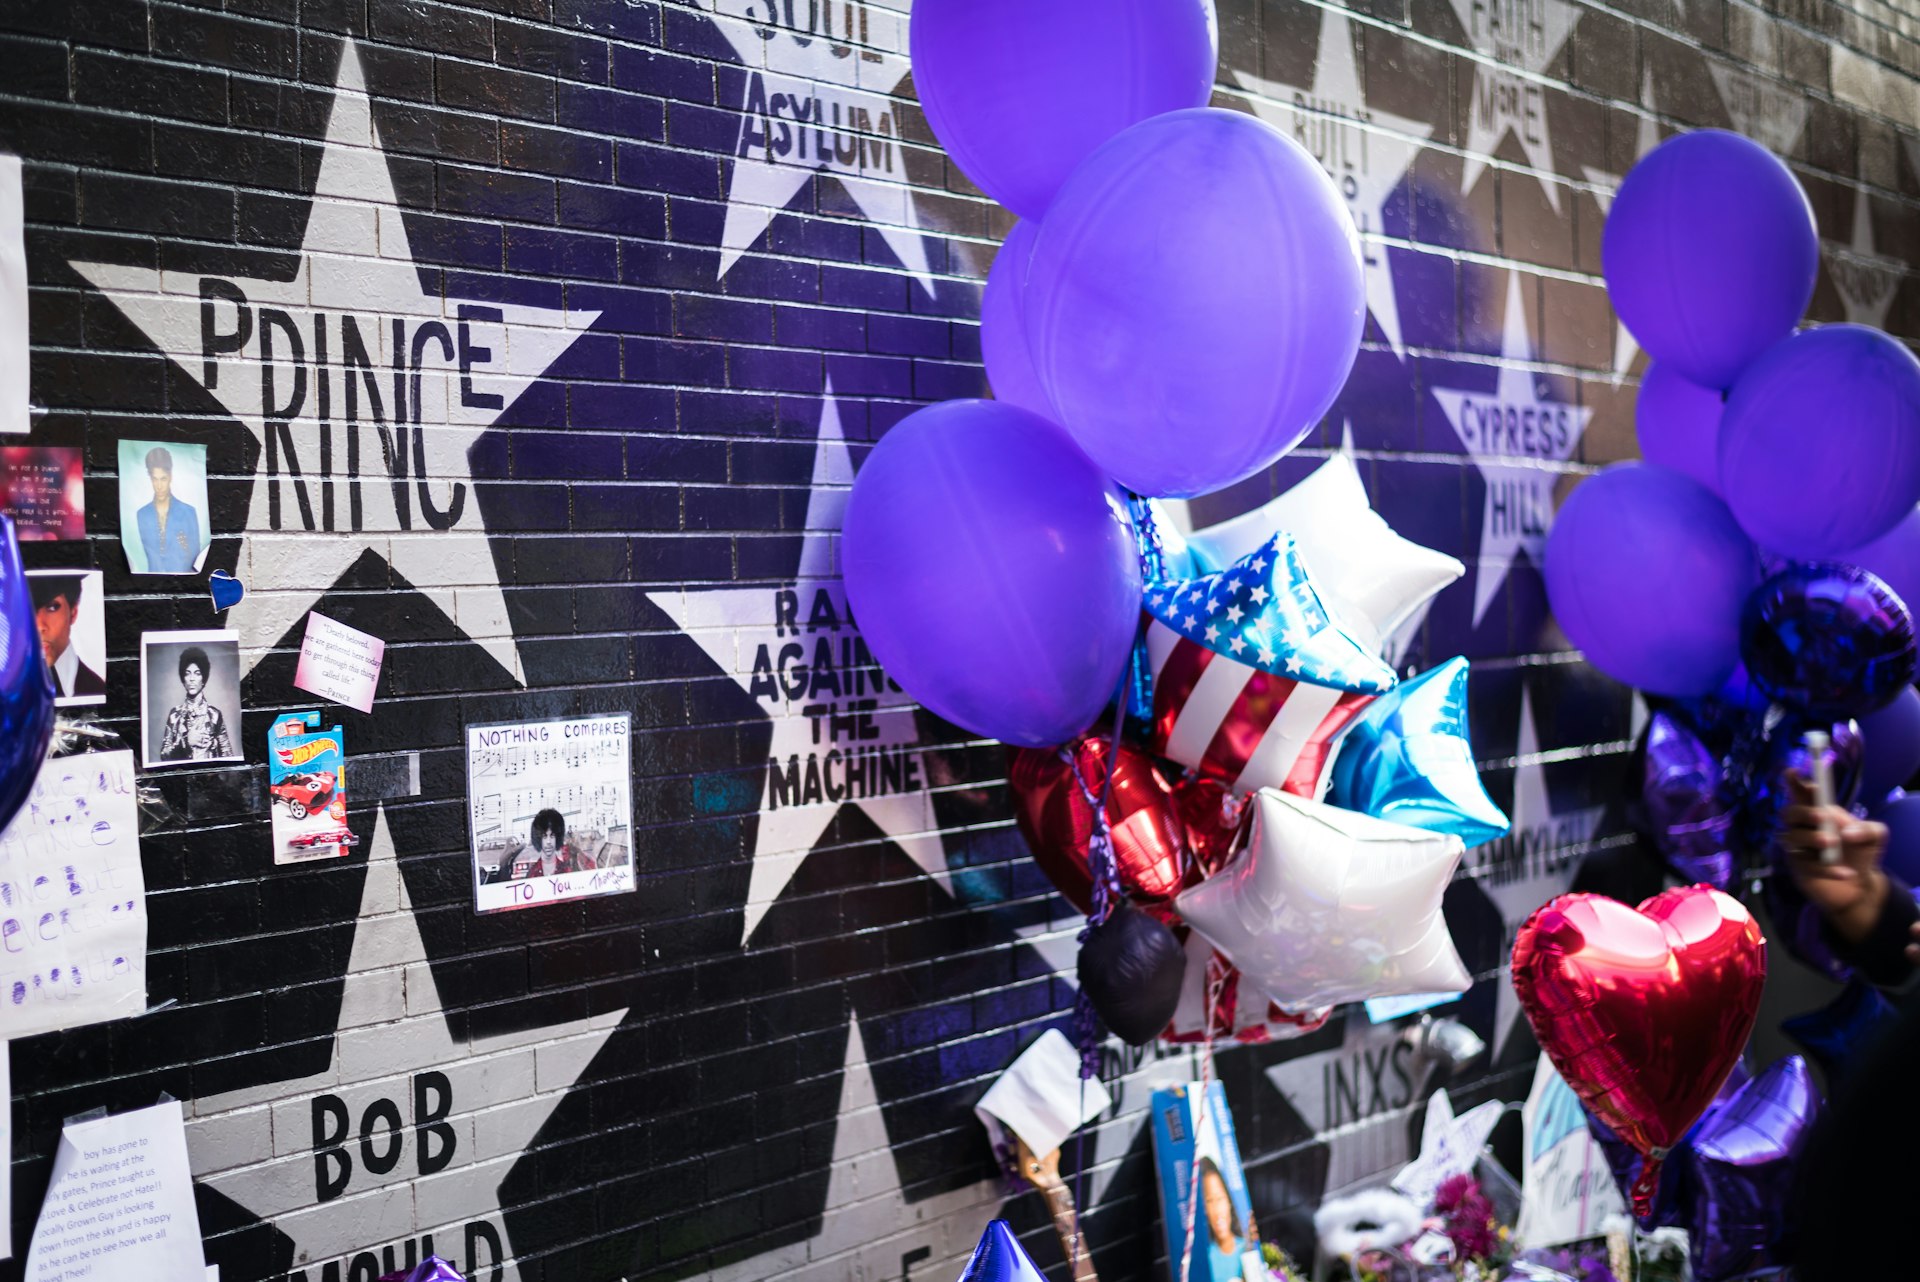 A tribute to Prince at the First Avenue nightclub in Minneapolis